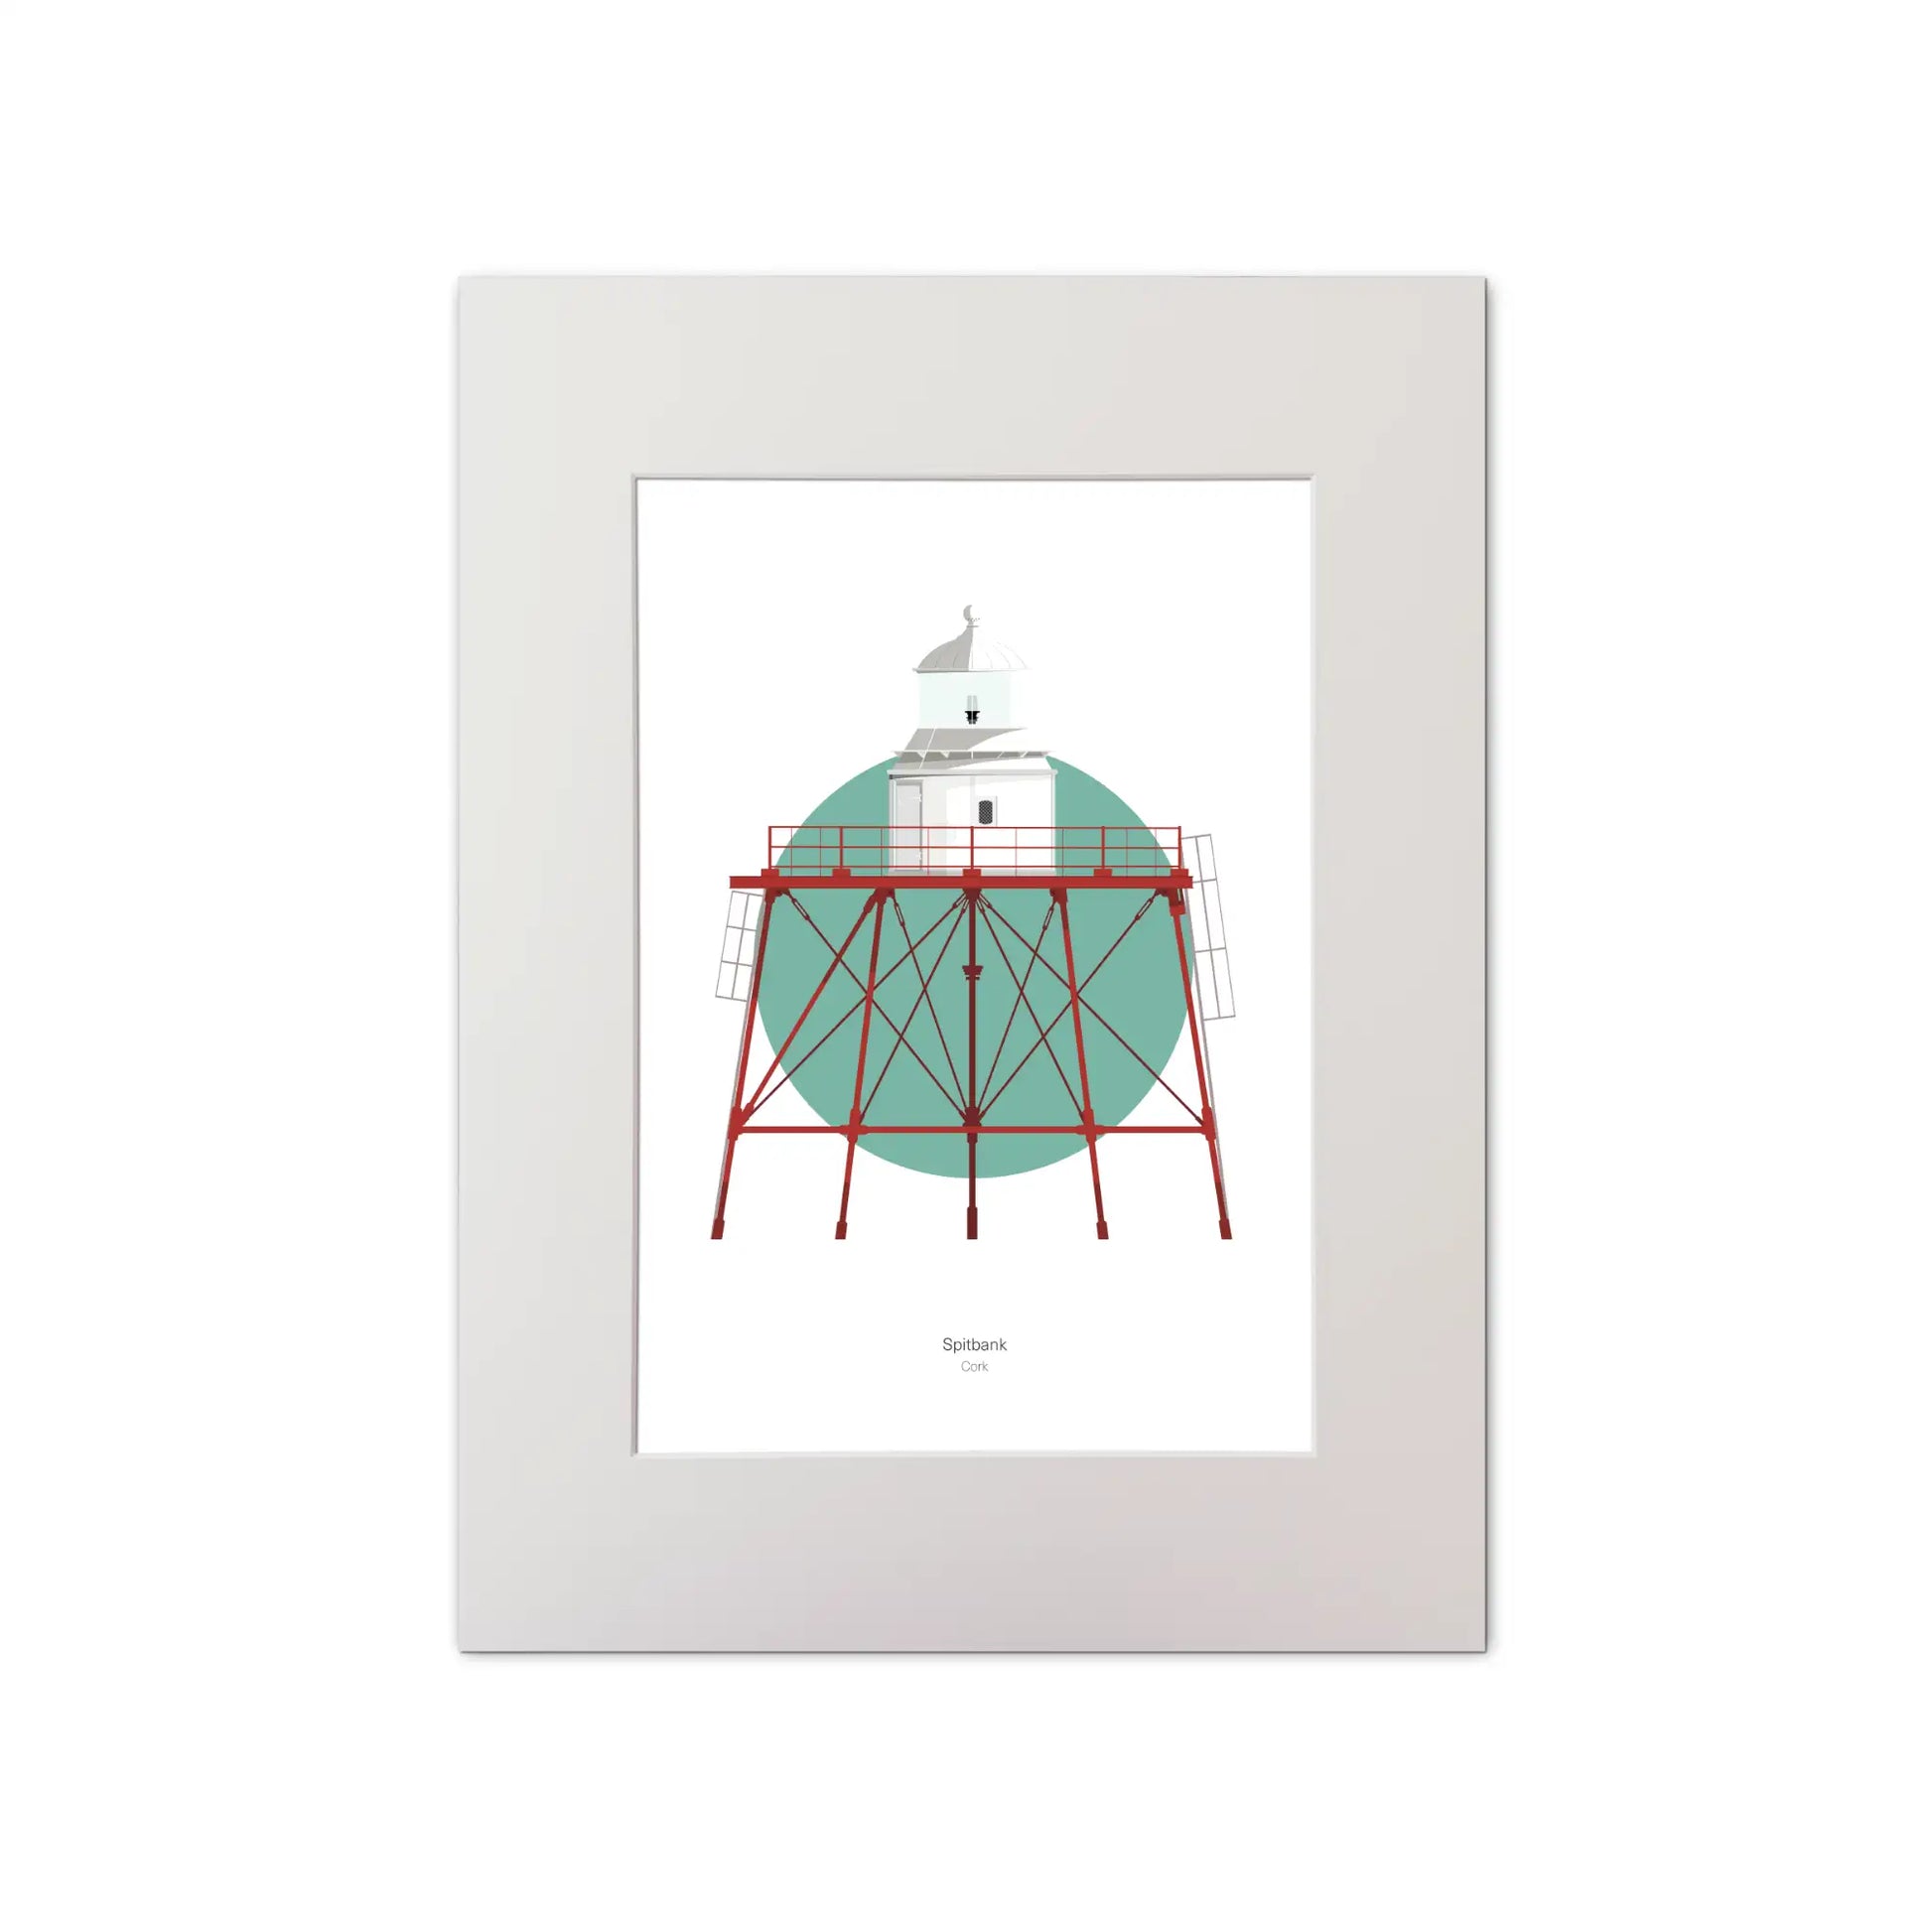 Illustration of Spitbank lighthouse on a white background inside light blue square, mounted and measuring 30x40cm.